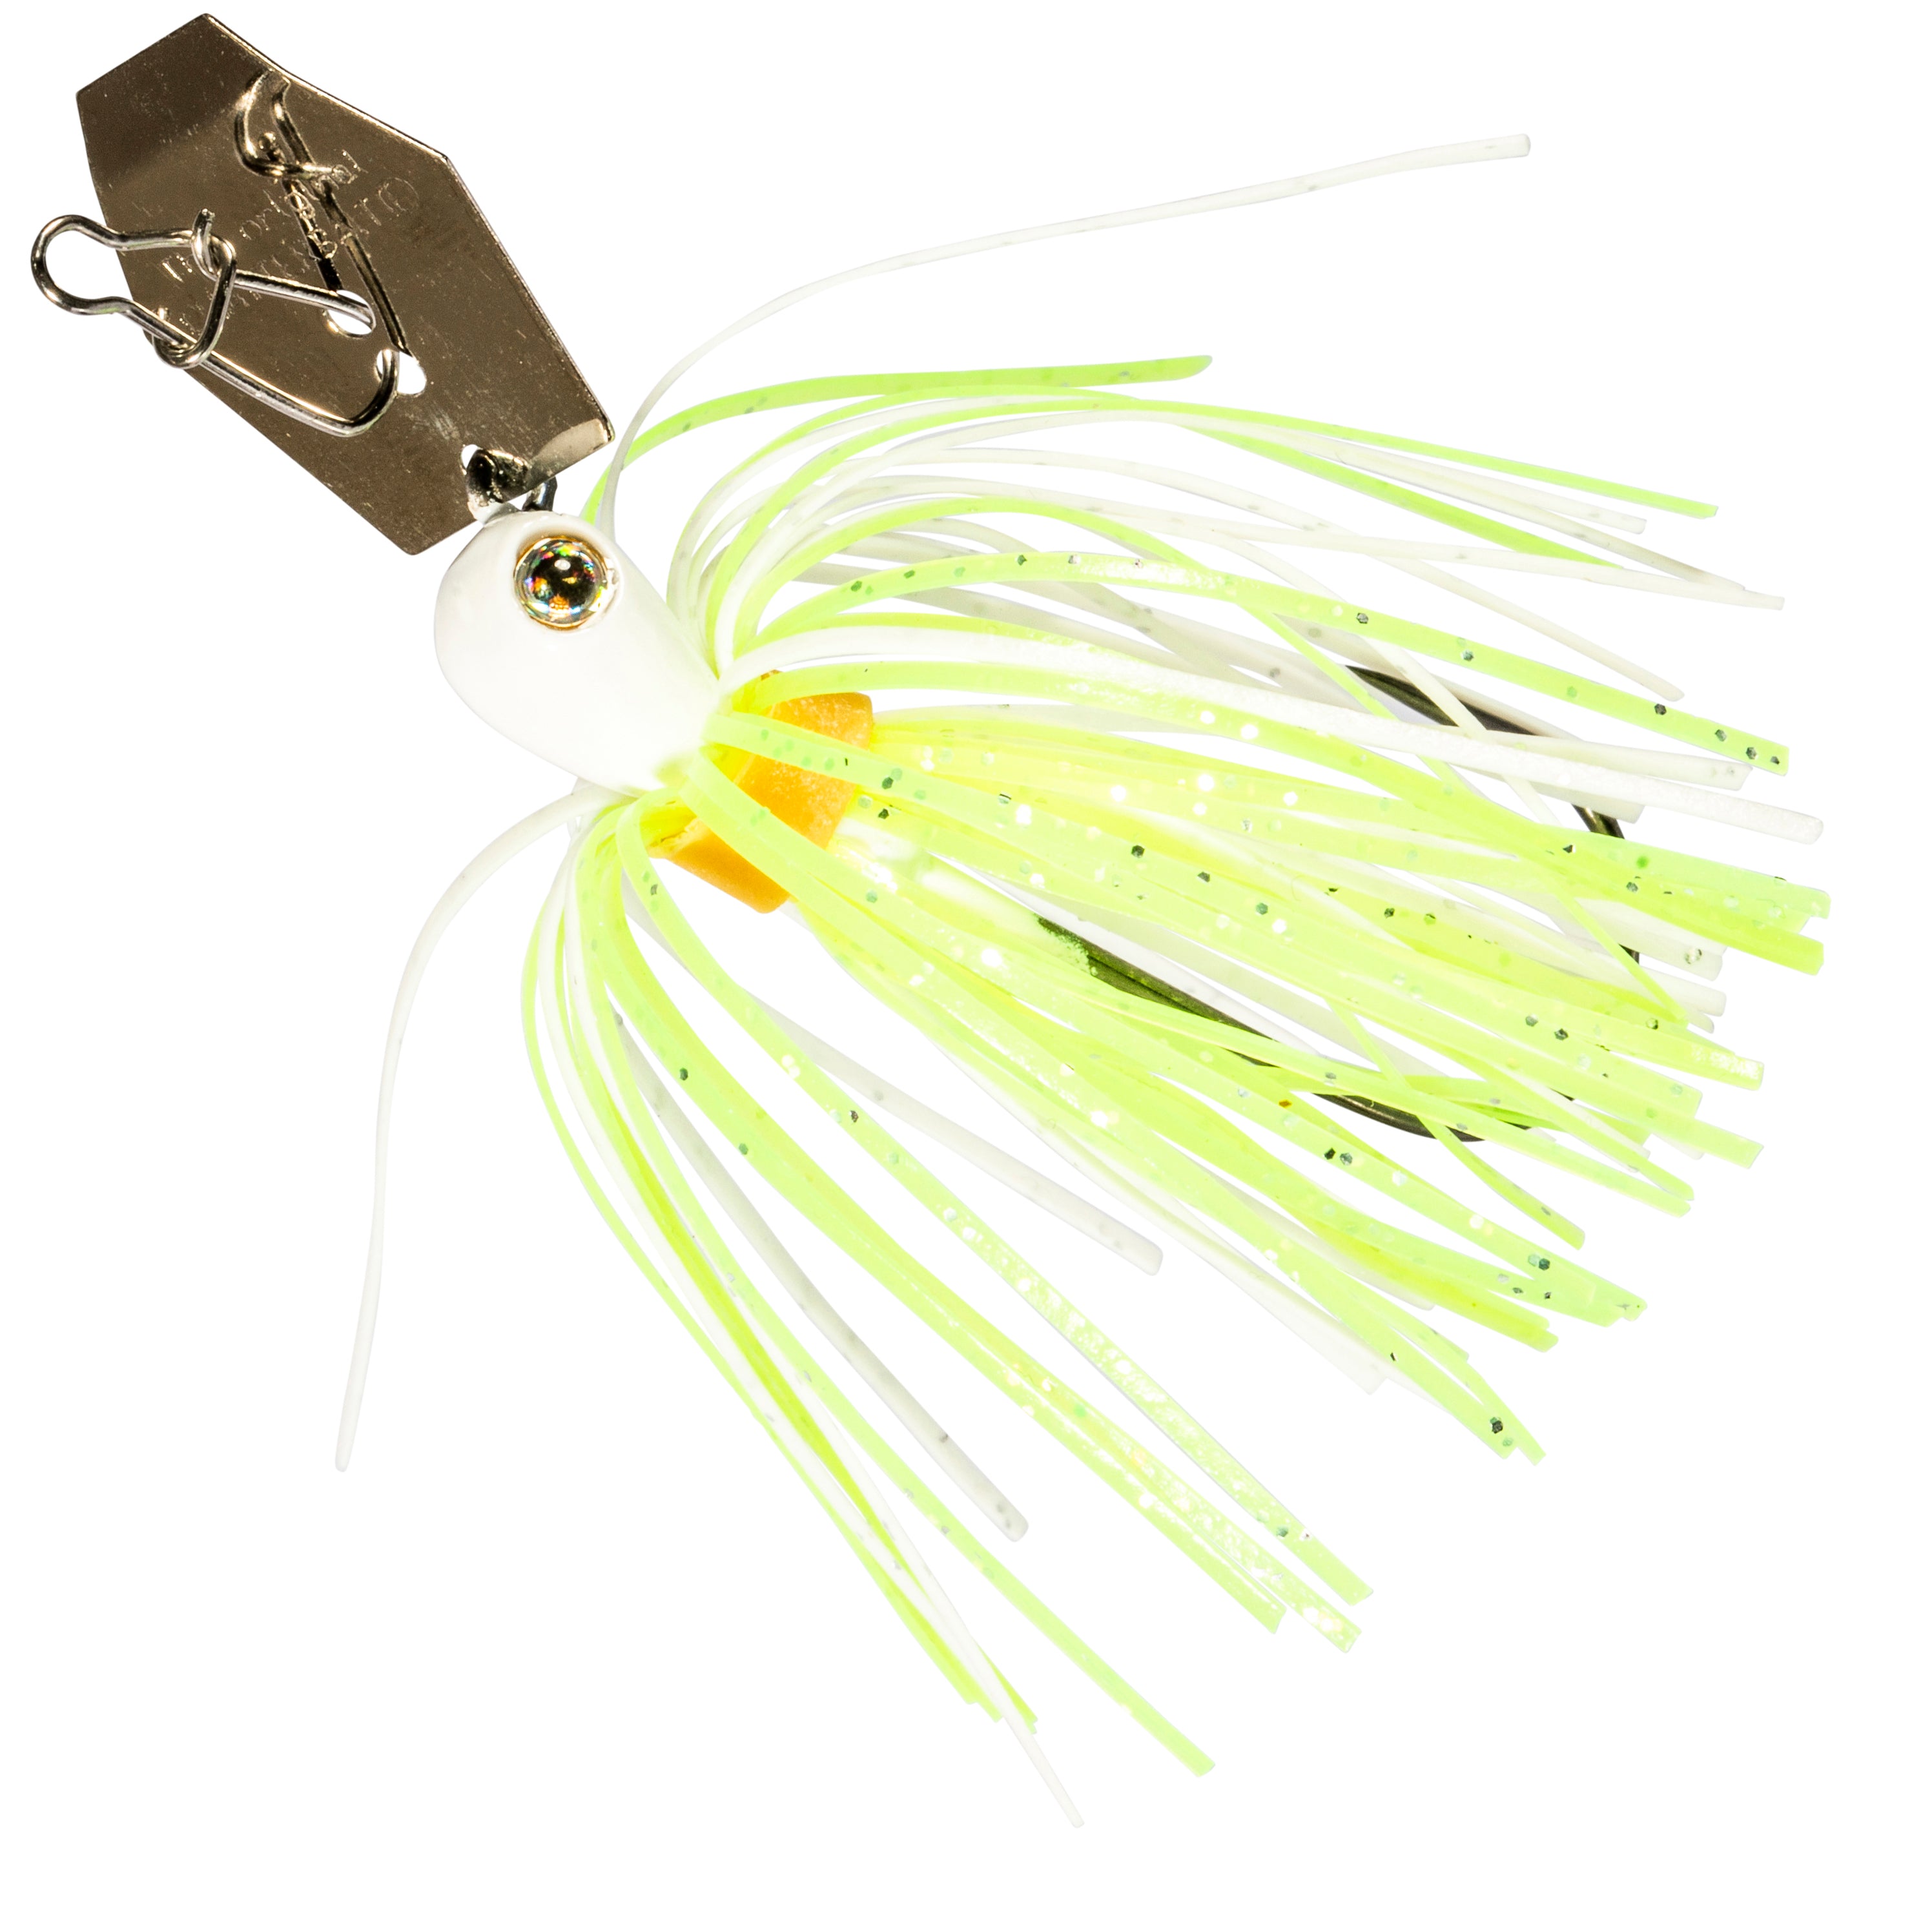 Z-Man ChatterBait Micro 1/8 oz. — Discount Tackle